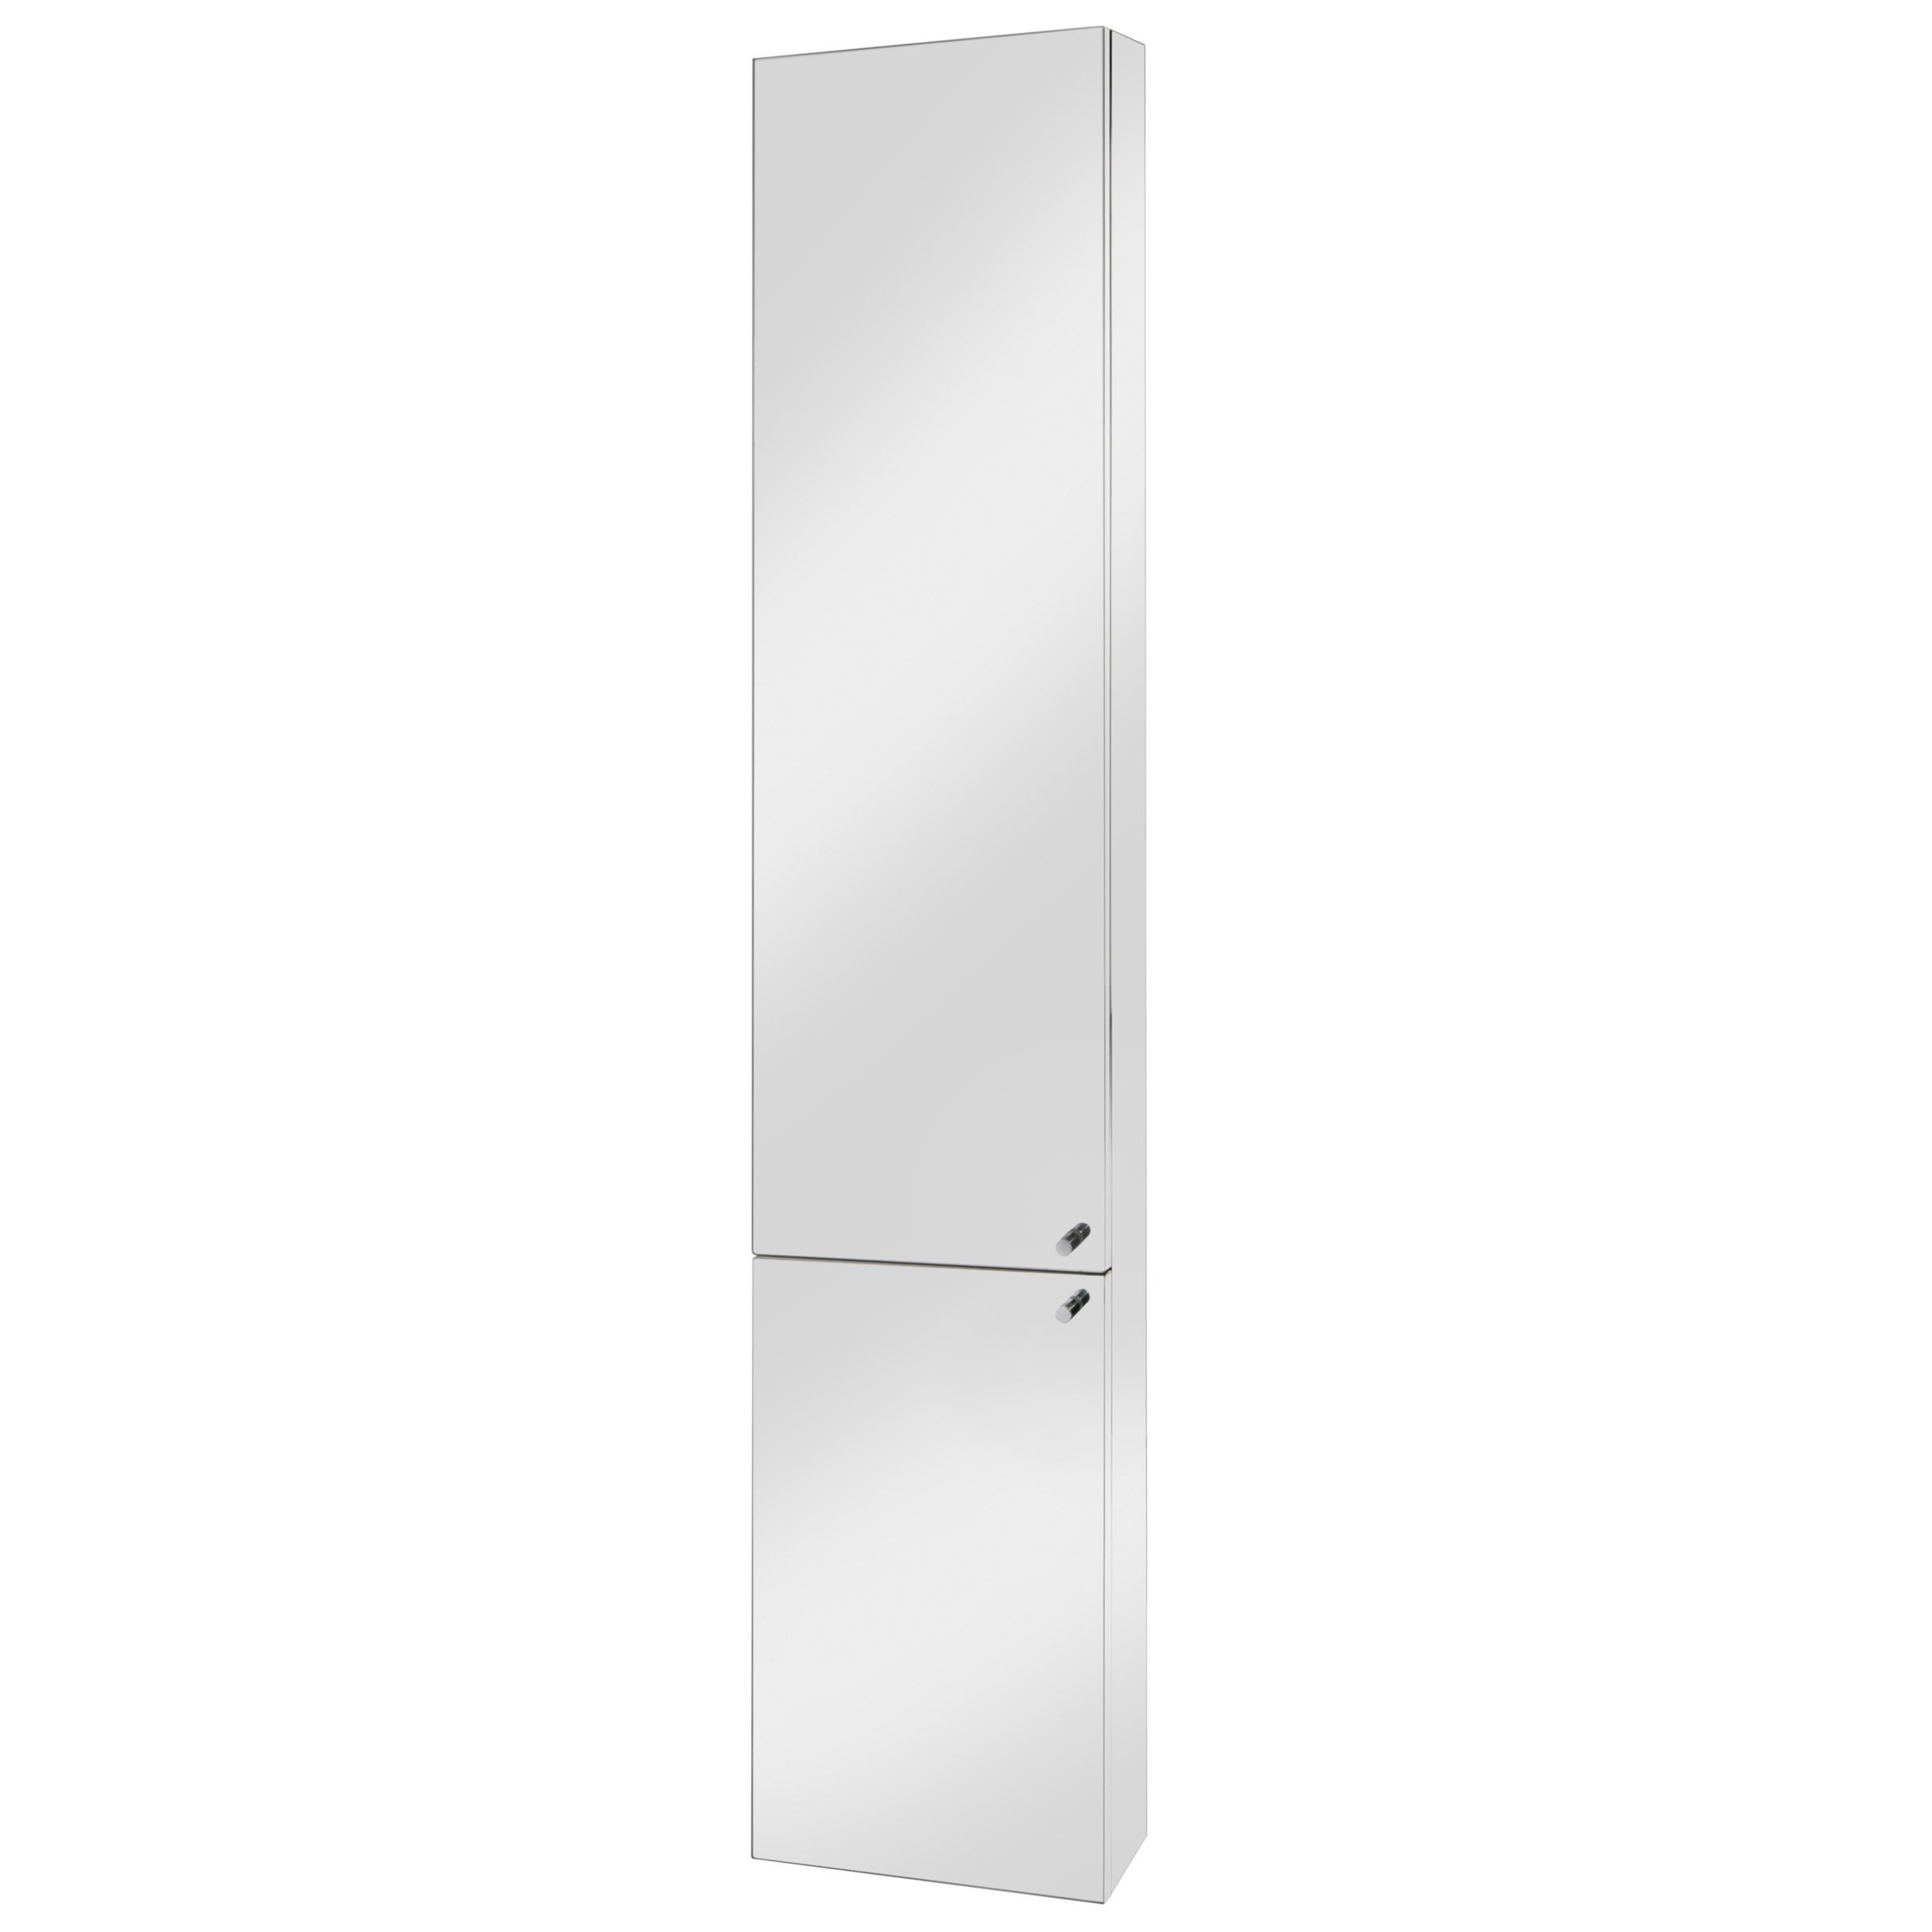 John Lewis Tall Stainless Steel Cabinet at JohnLewis